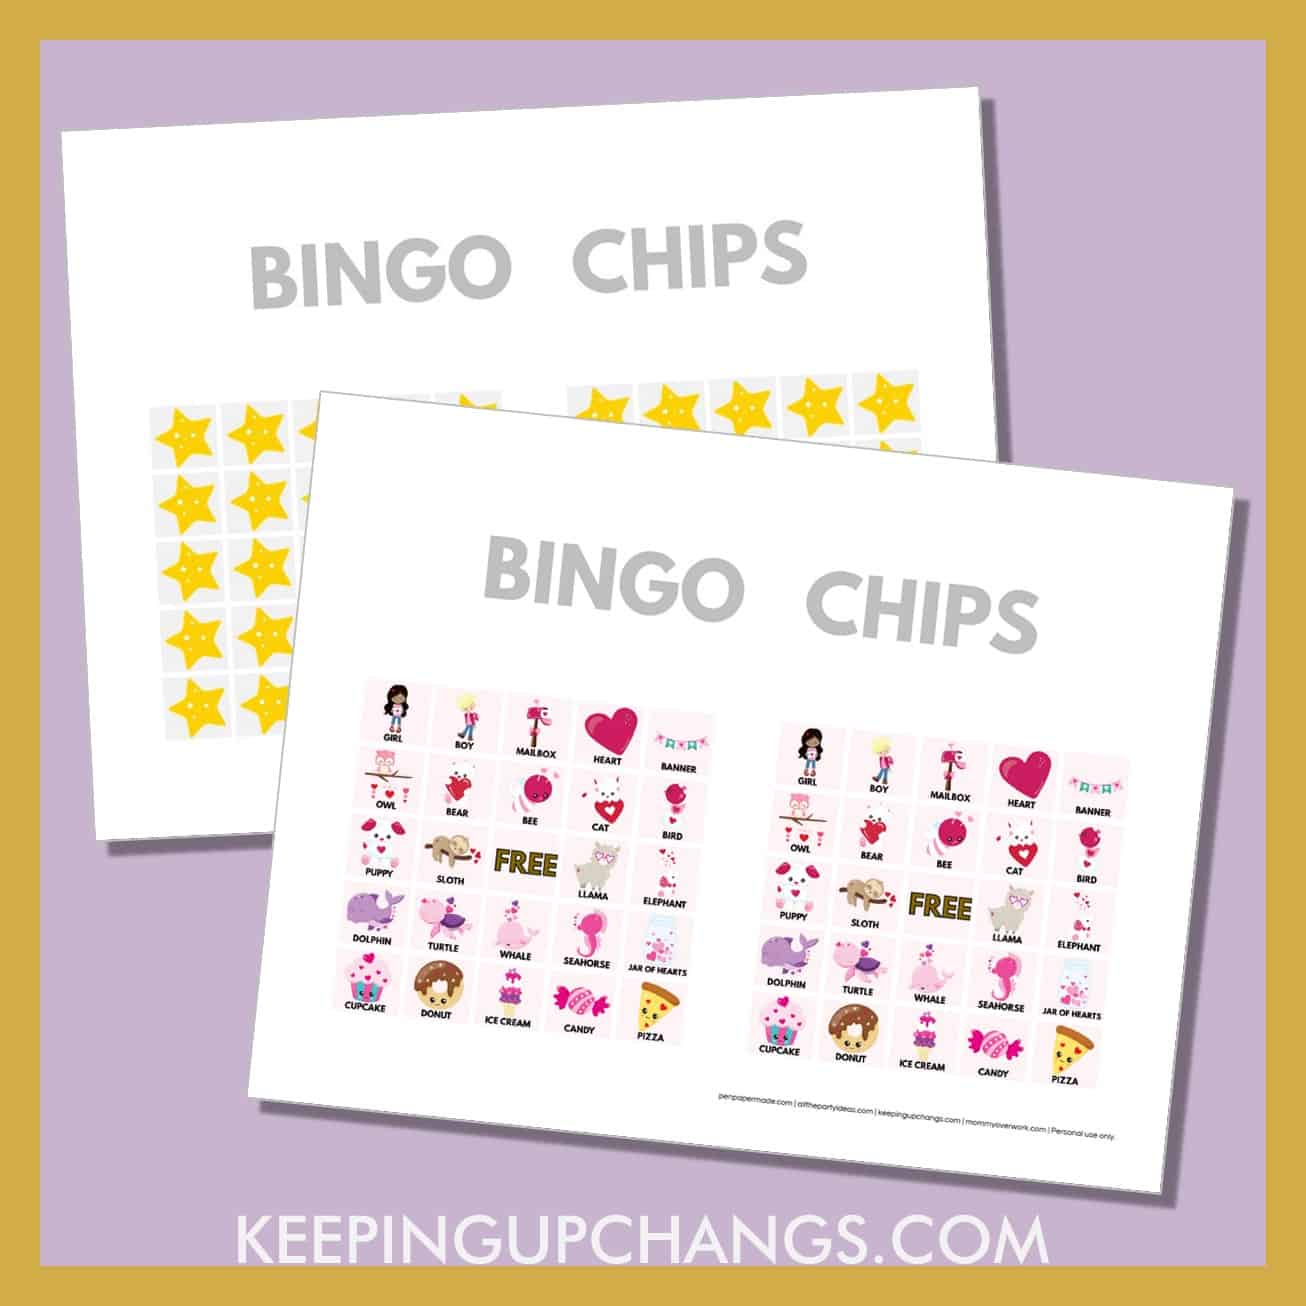 free valentine's bingo card 5x5 game chips, tokens, markers.